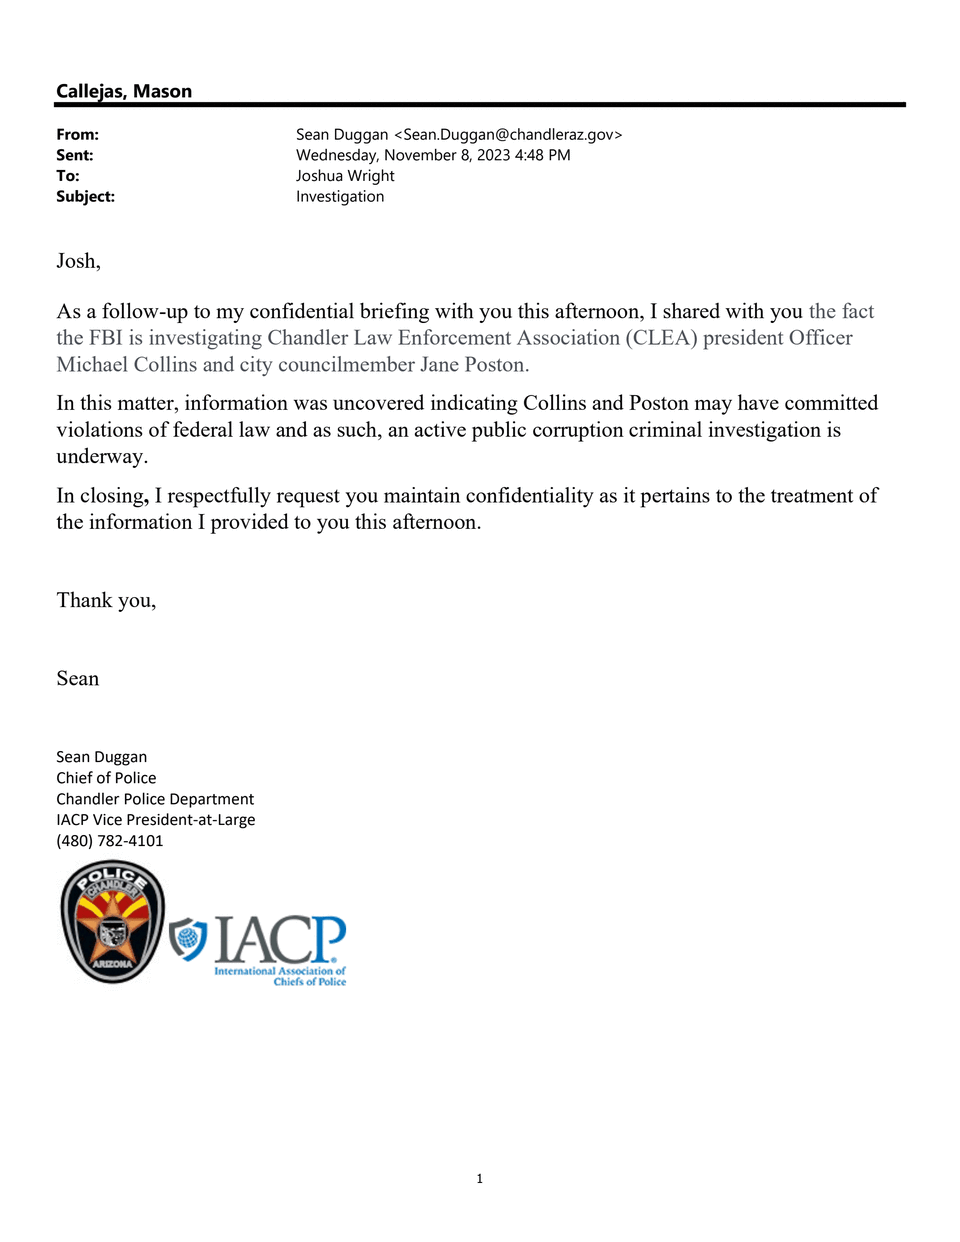 Page 1 of Email - FBI investigate Chandler police union president and council member